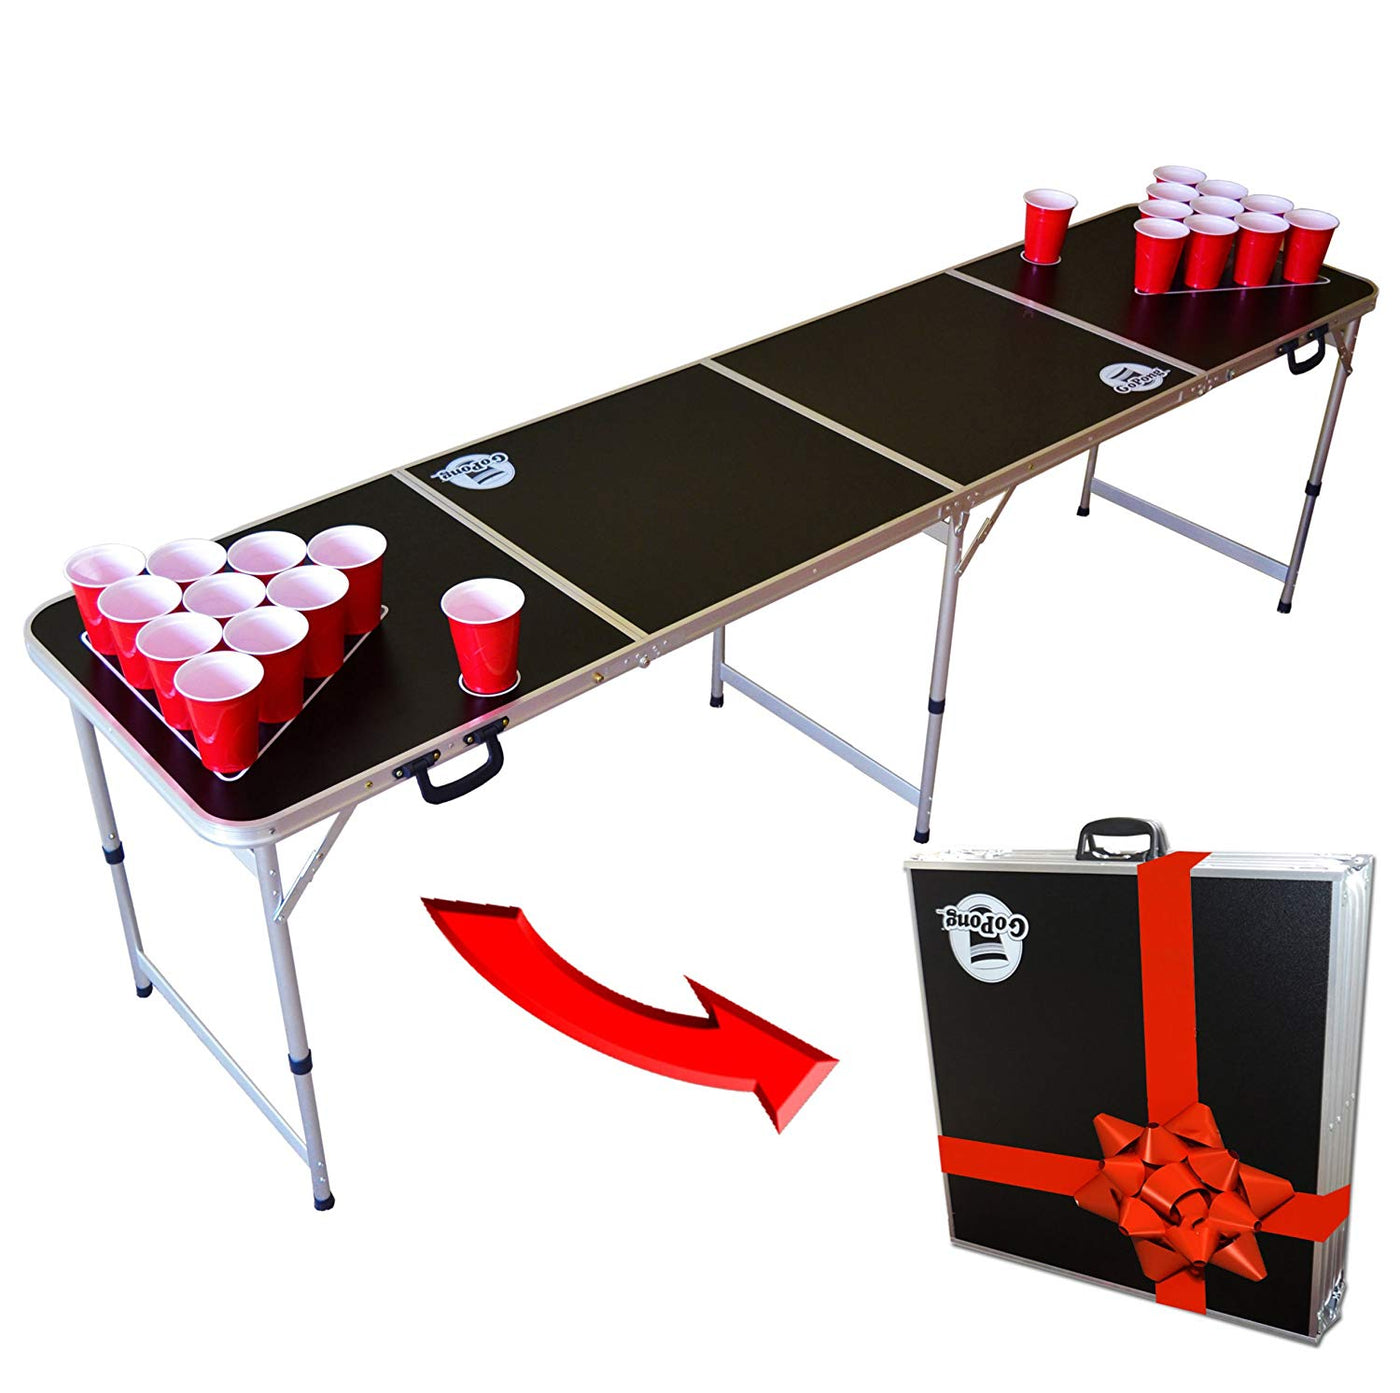 Goplus 8 Foot Beer Pong Table Portable Party Drinking Game Table